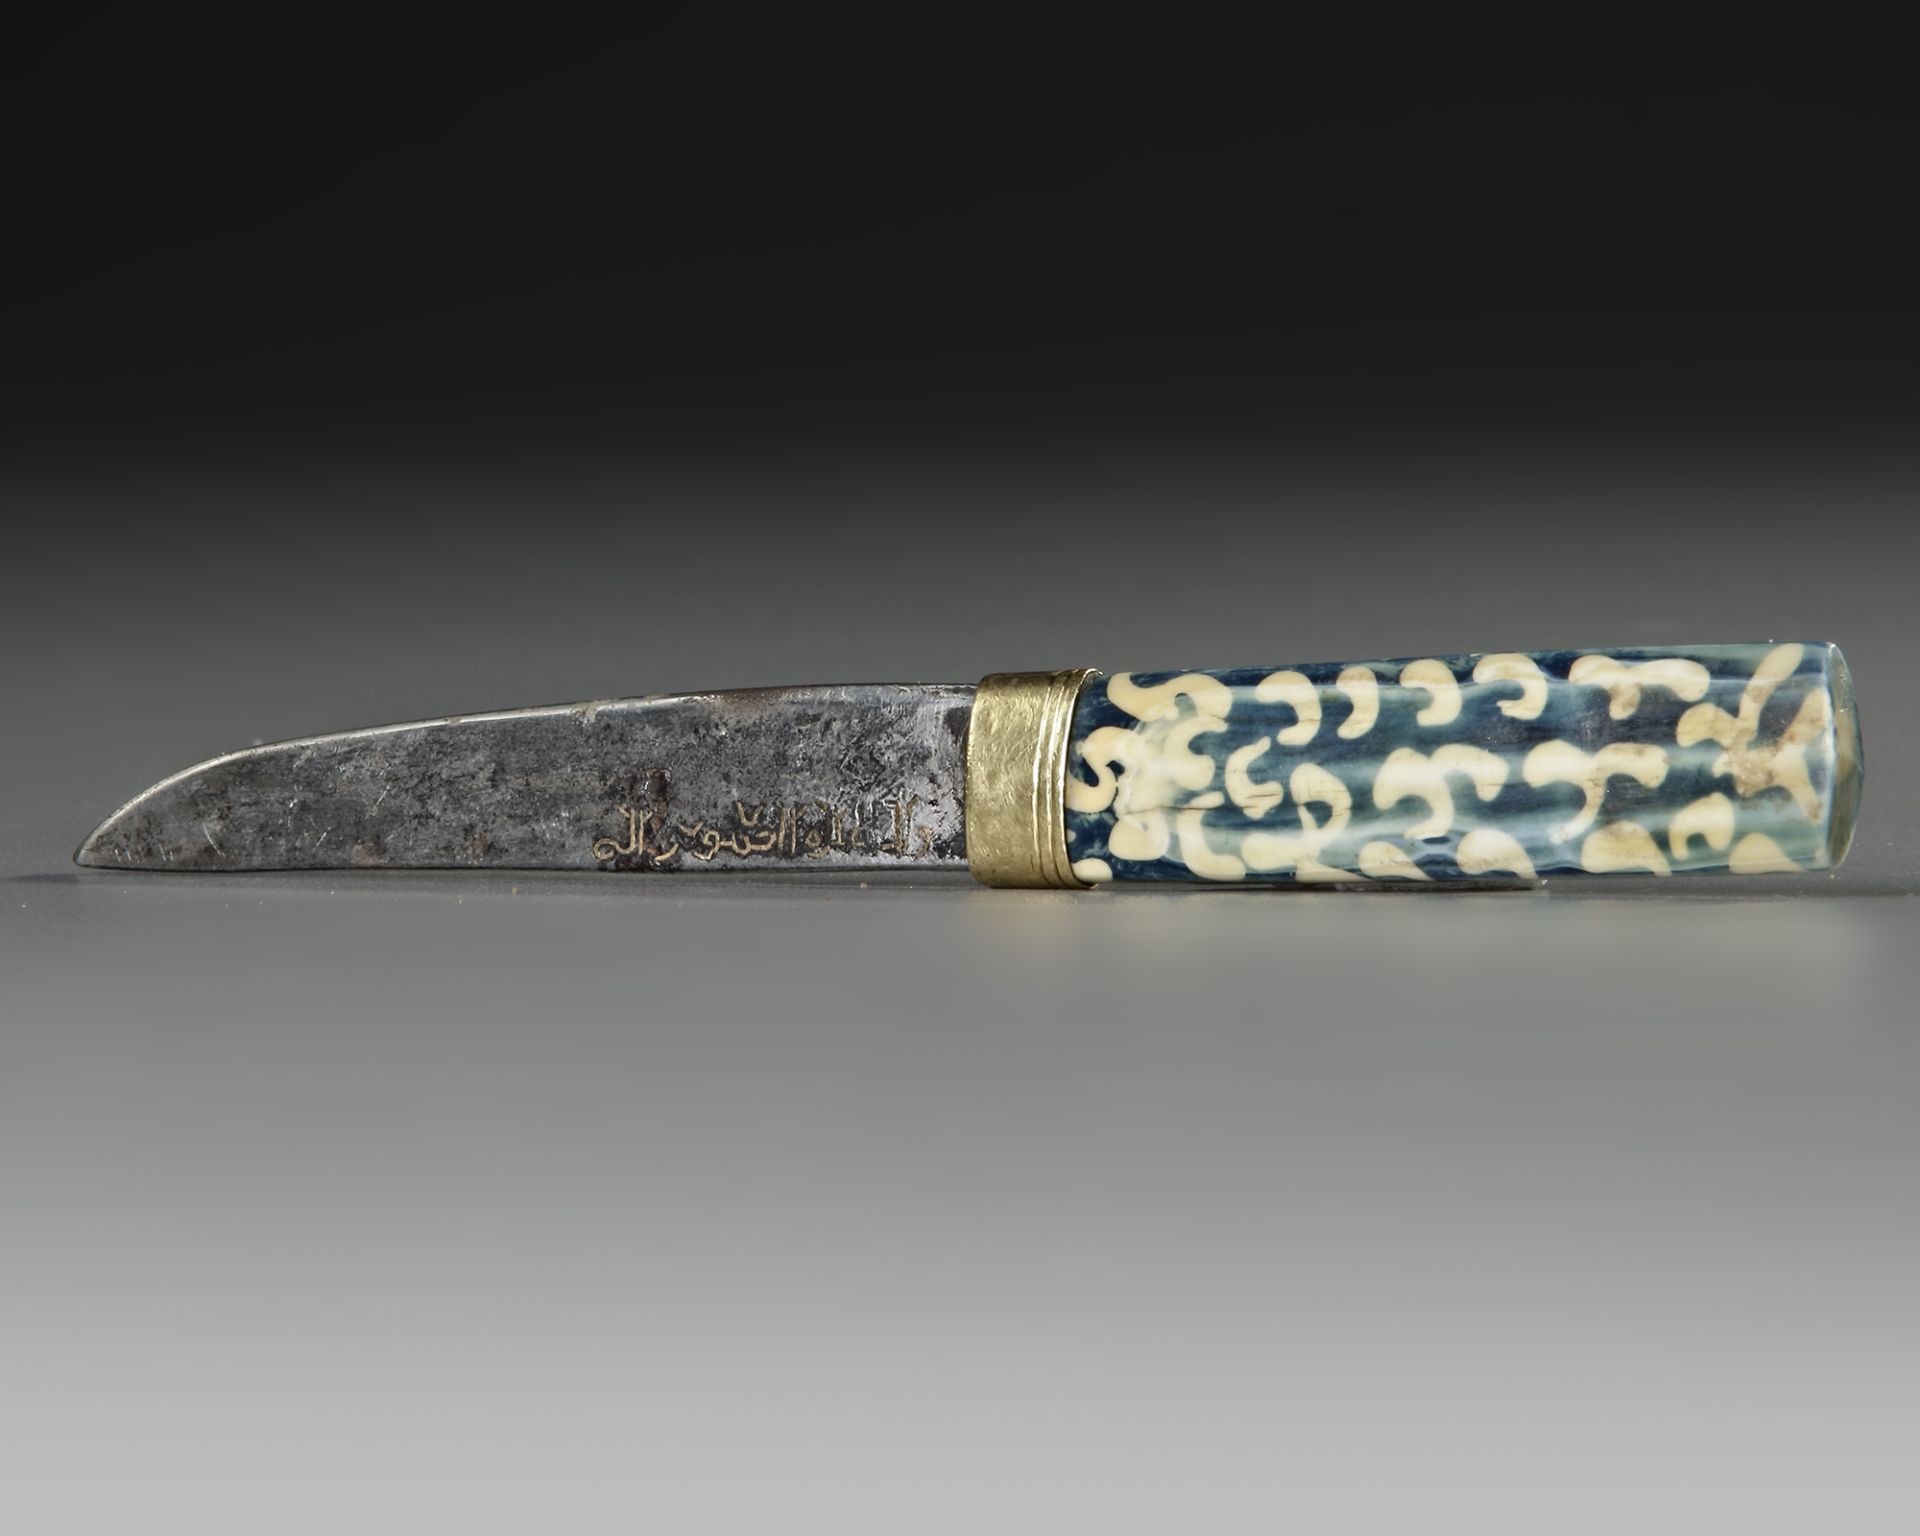 A SMALL INSCRIBED KNIFE, LATE TIMURID, 15TH-16TH CENTURY - Image 10 of 12